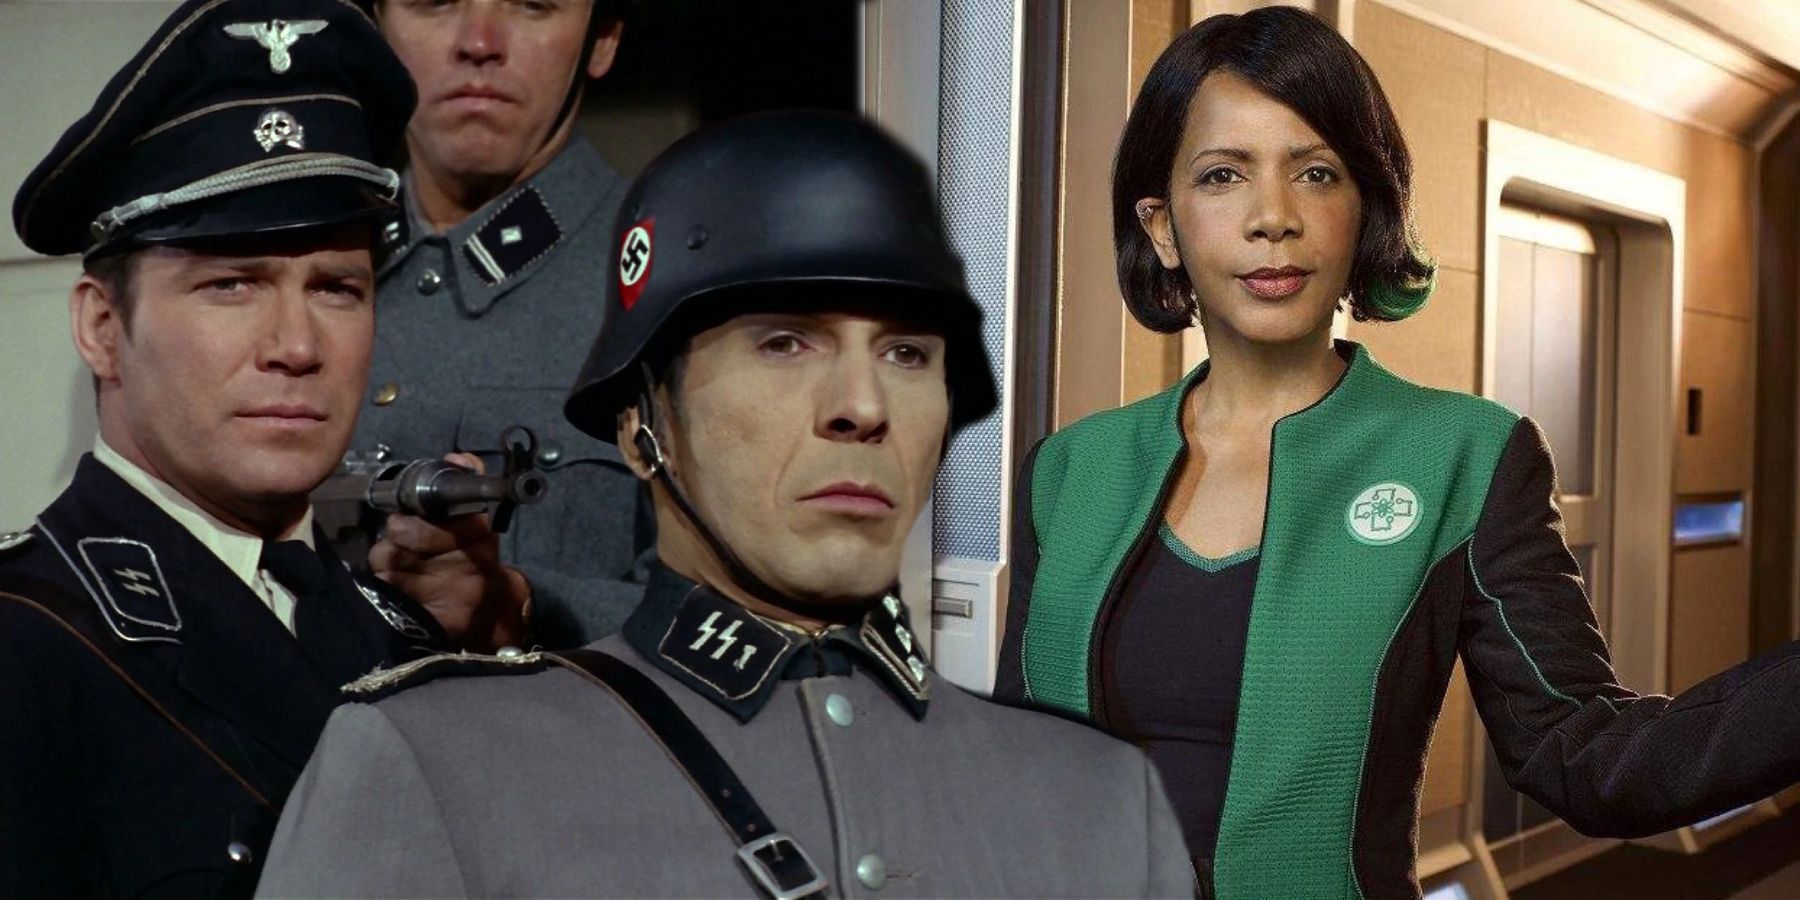 Kirk and Spock disguised as Nazis in Star Trek and Claire Finn in The Orville